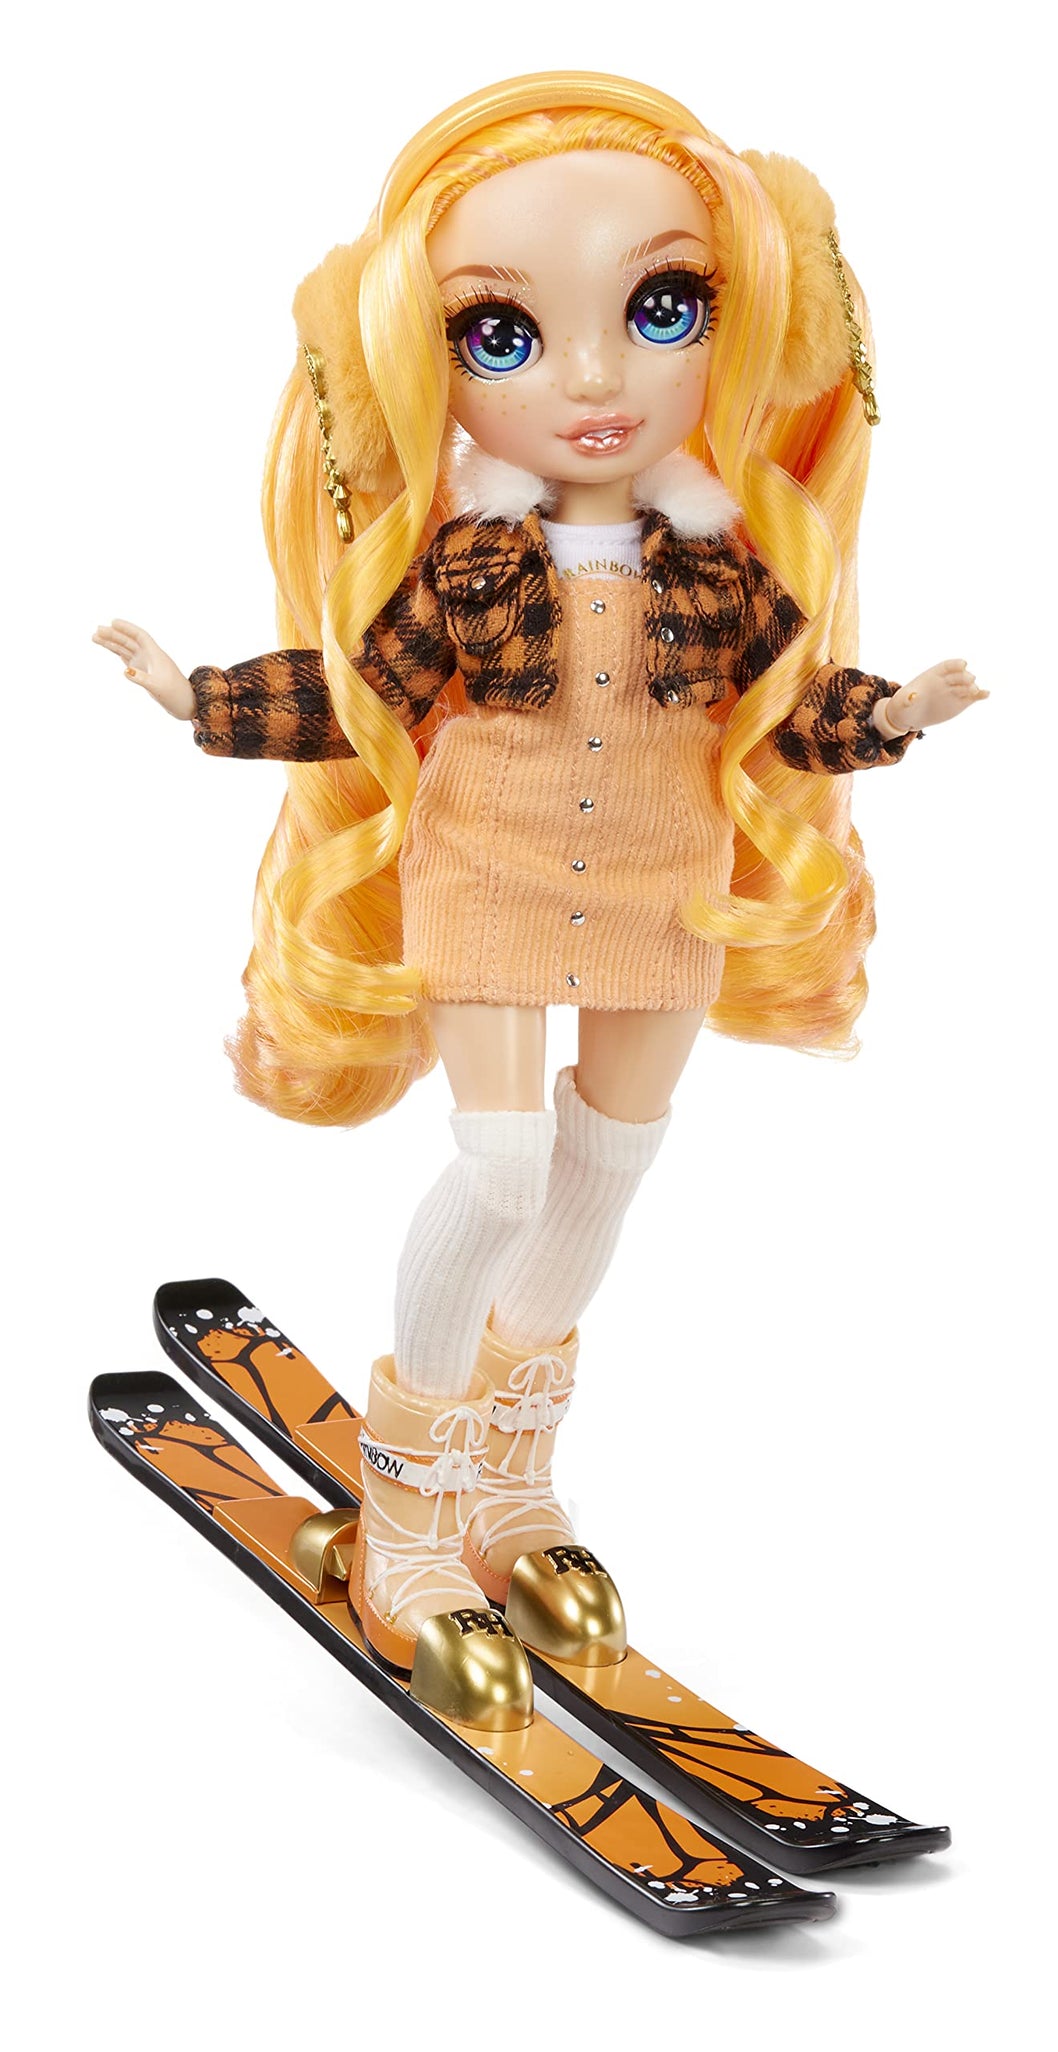 Rainbow High Winter Break Poppy Rowan – Orange Fashion Doll and Playset with 2 Designer Outfits, Pair of Skis and Accessories, Gift for Kids and Collectors, Toys for Kids Ages 6 7 8+ to 12 Years Old